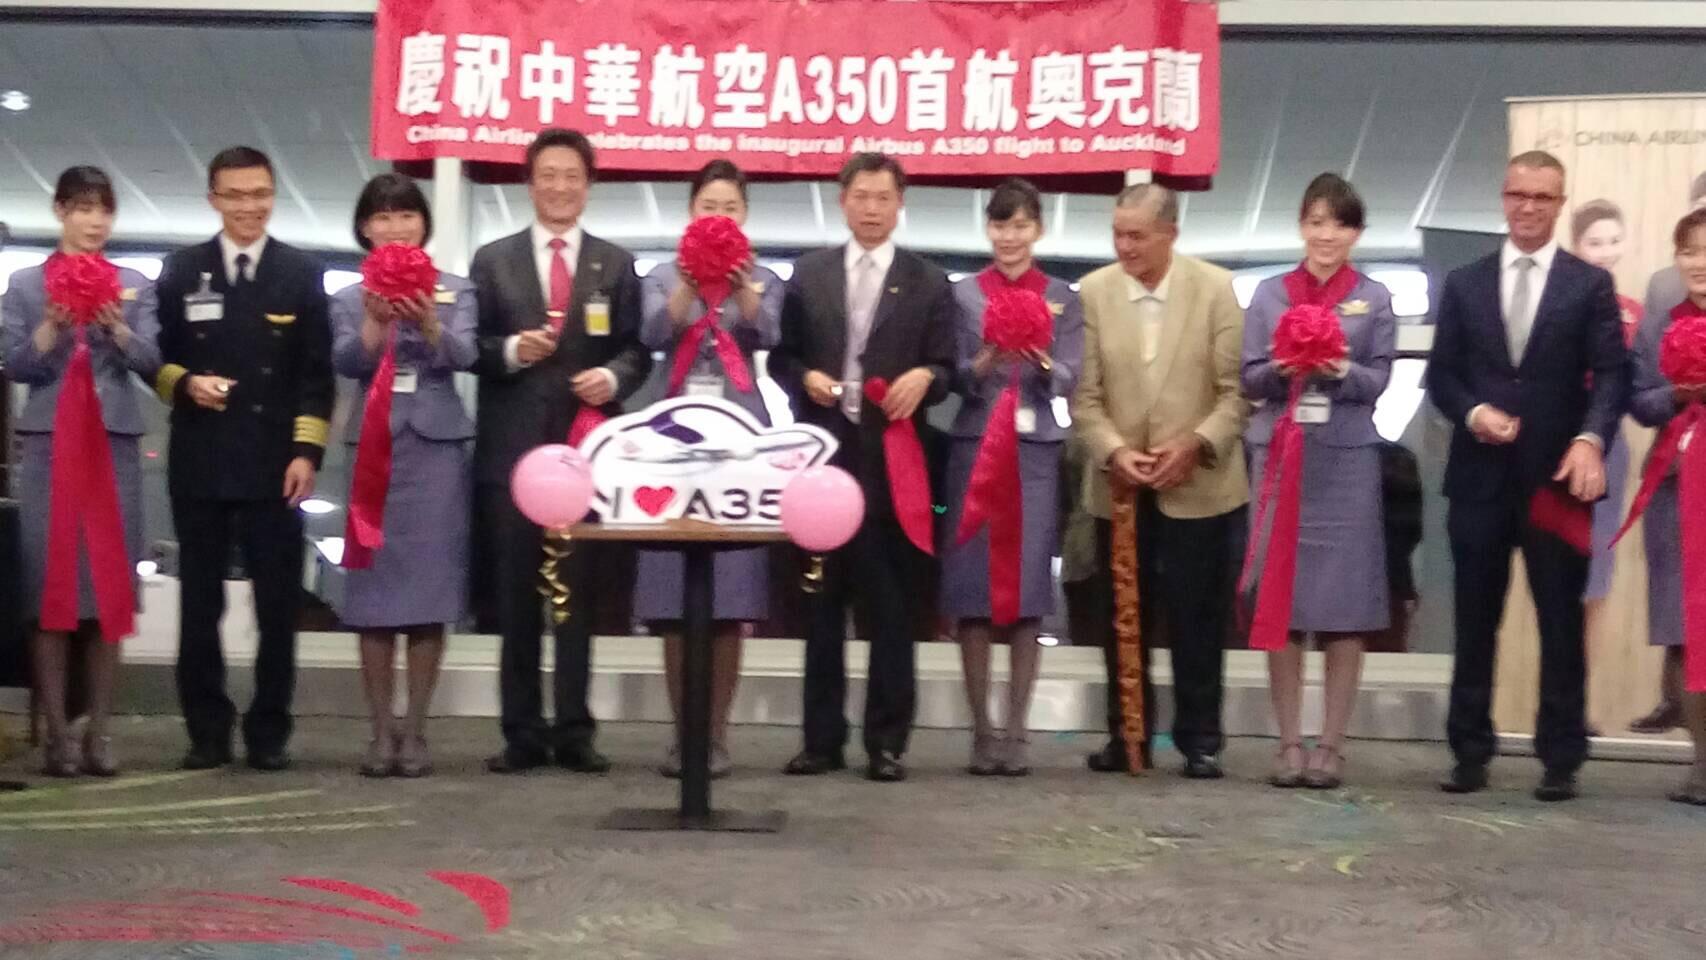 China Airlines A350 (Auckland—Taipei flight) ’s Ribbon Cutting Celebration